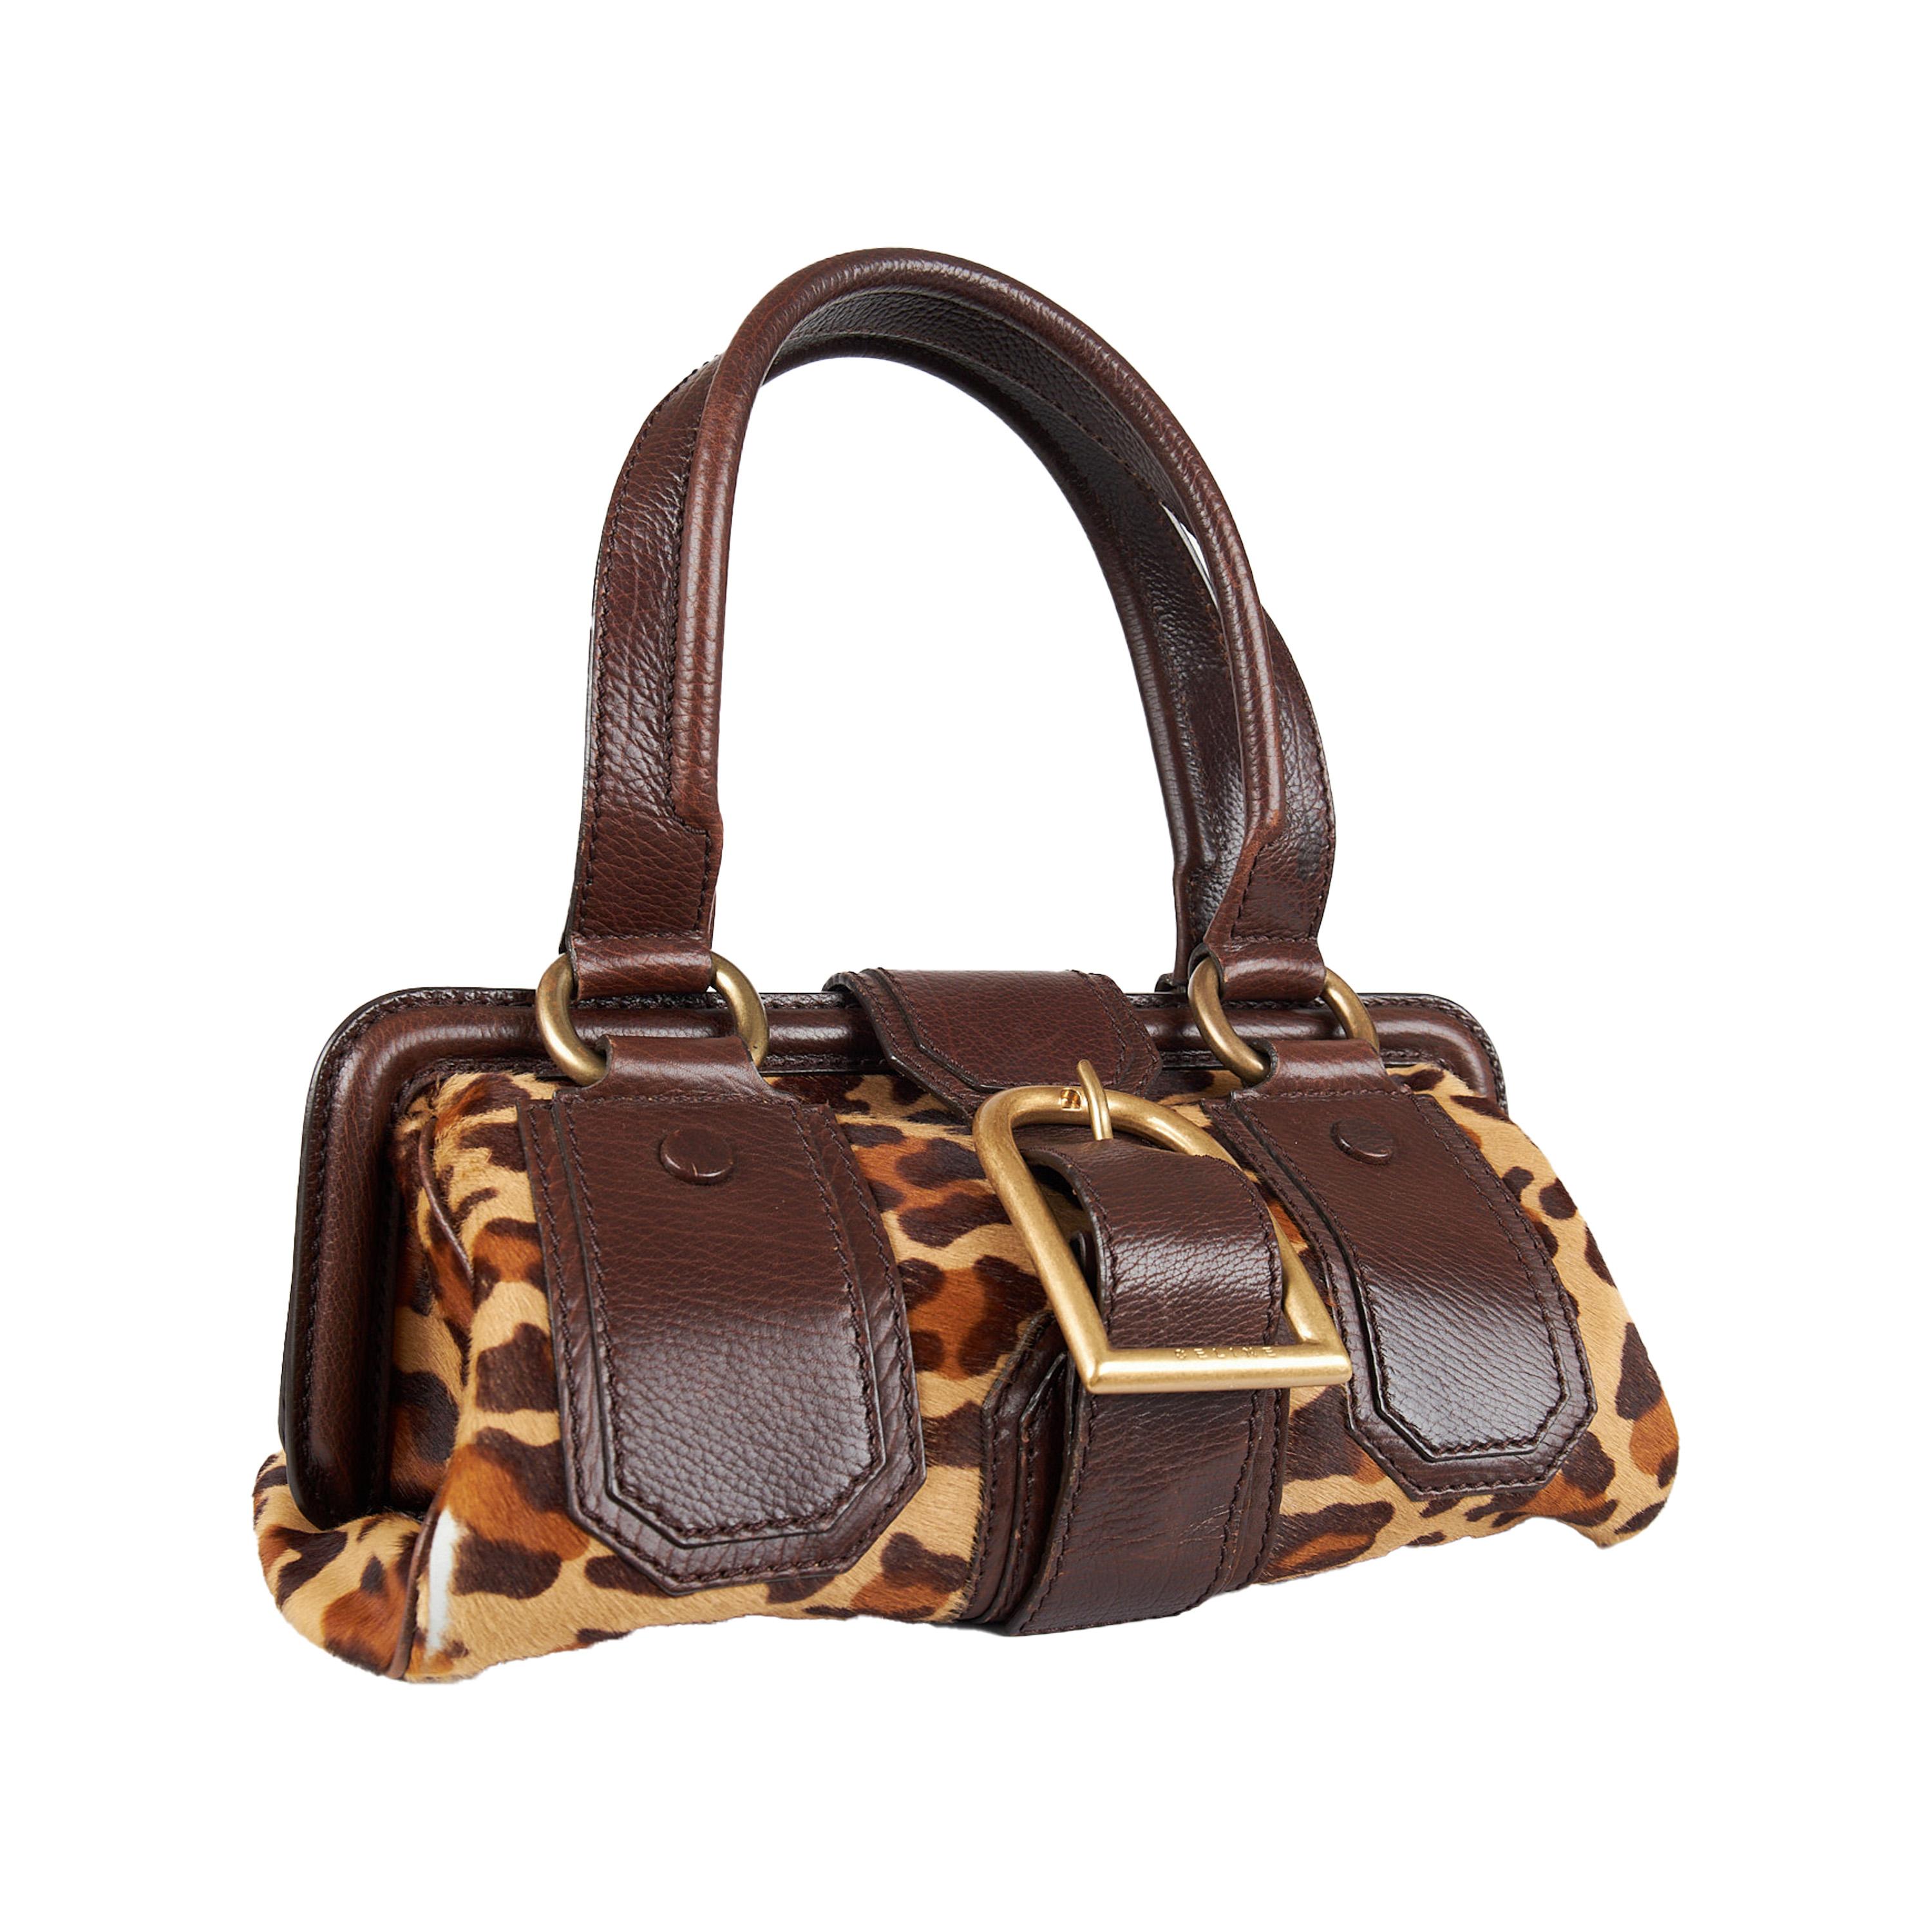 This Celine satchel is an ideal mix of classic and modern, designed by Michael Kors in 2004. Crafted with leopard-printed calf hair and leather, it is lined with dark brown jacquard fabric and boasts a spacious interior for your belongings. Accented